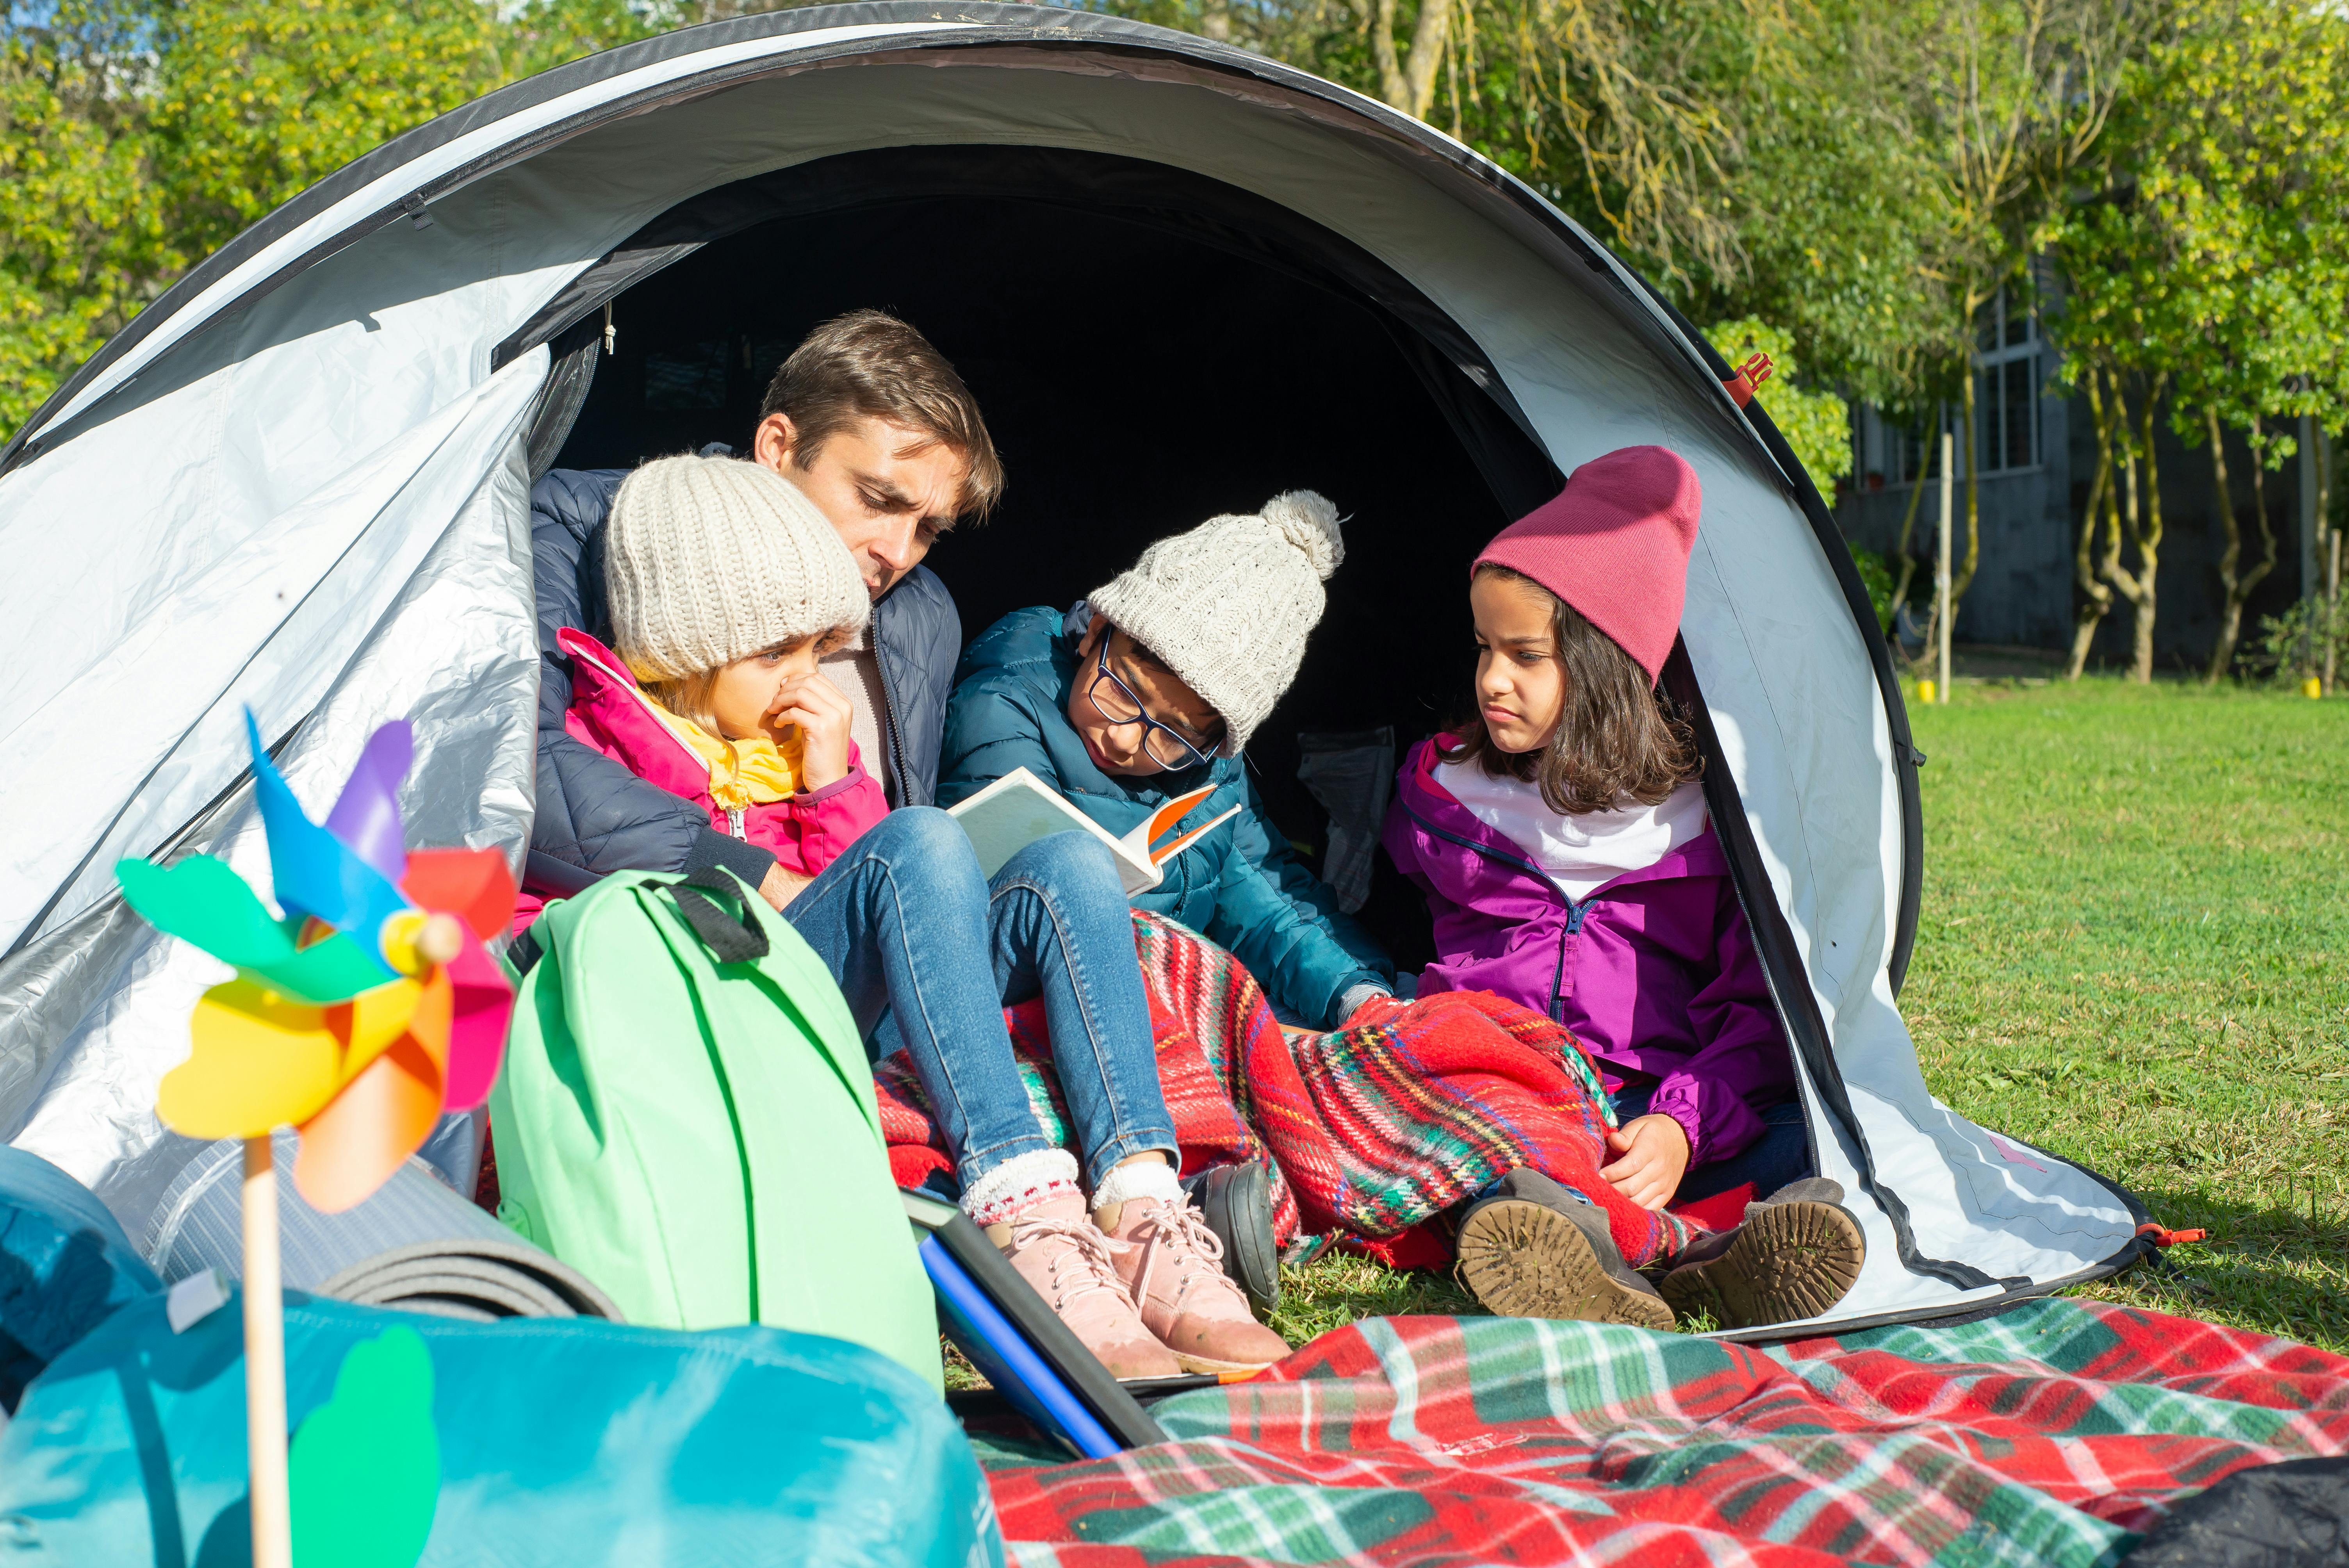 Keep The Zzzs Flowing While Camping With the Family This Summer